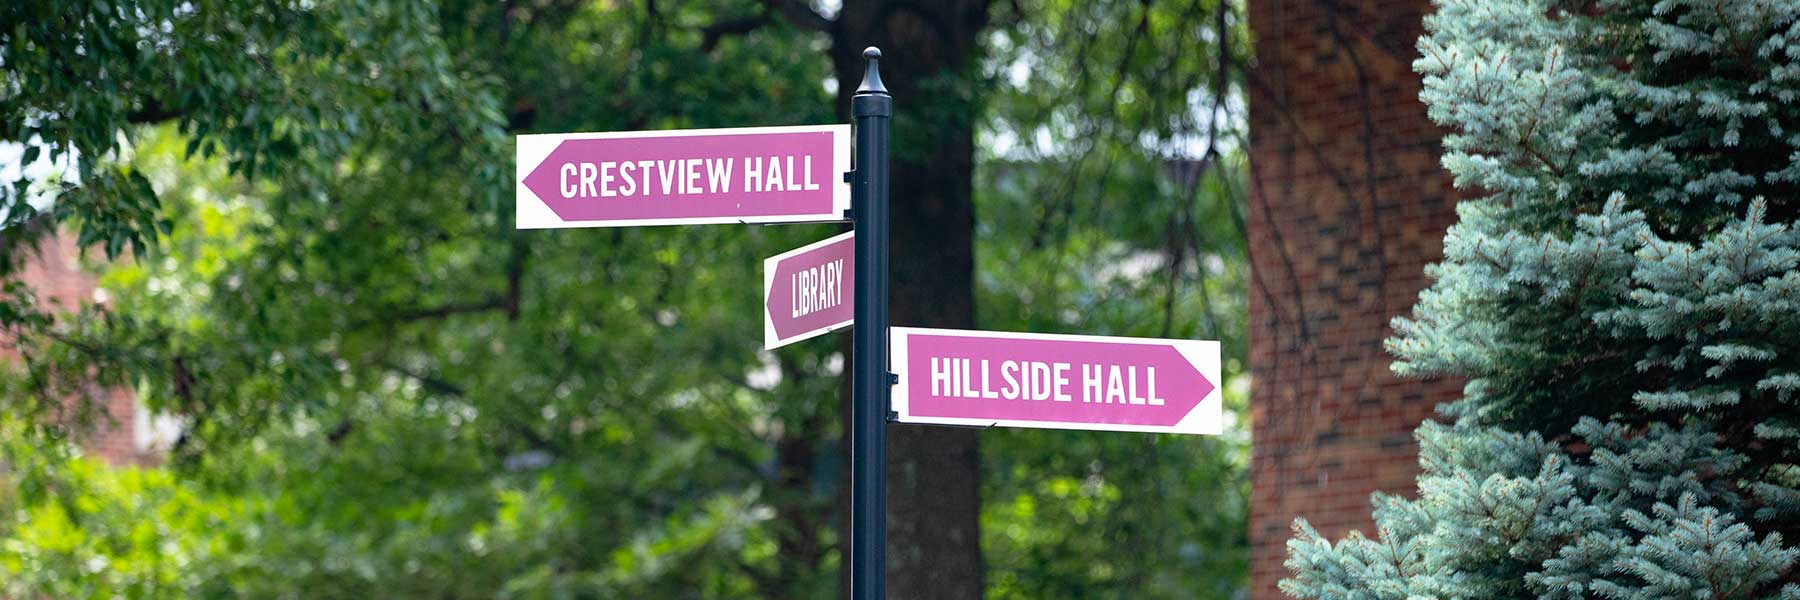 Three IU Southeast directional signs on a pole reading Crestview Hall, Library, and Hillside Hall